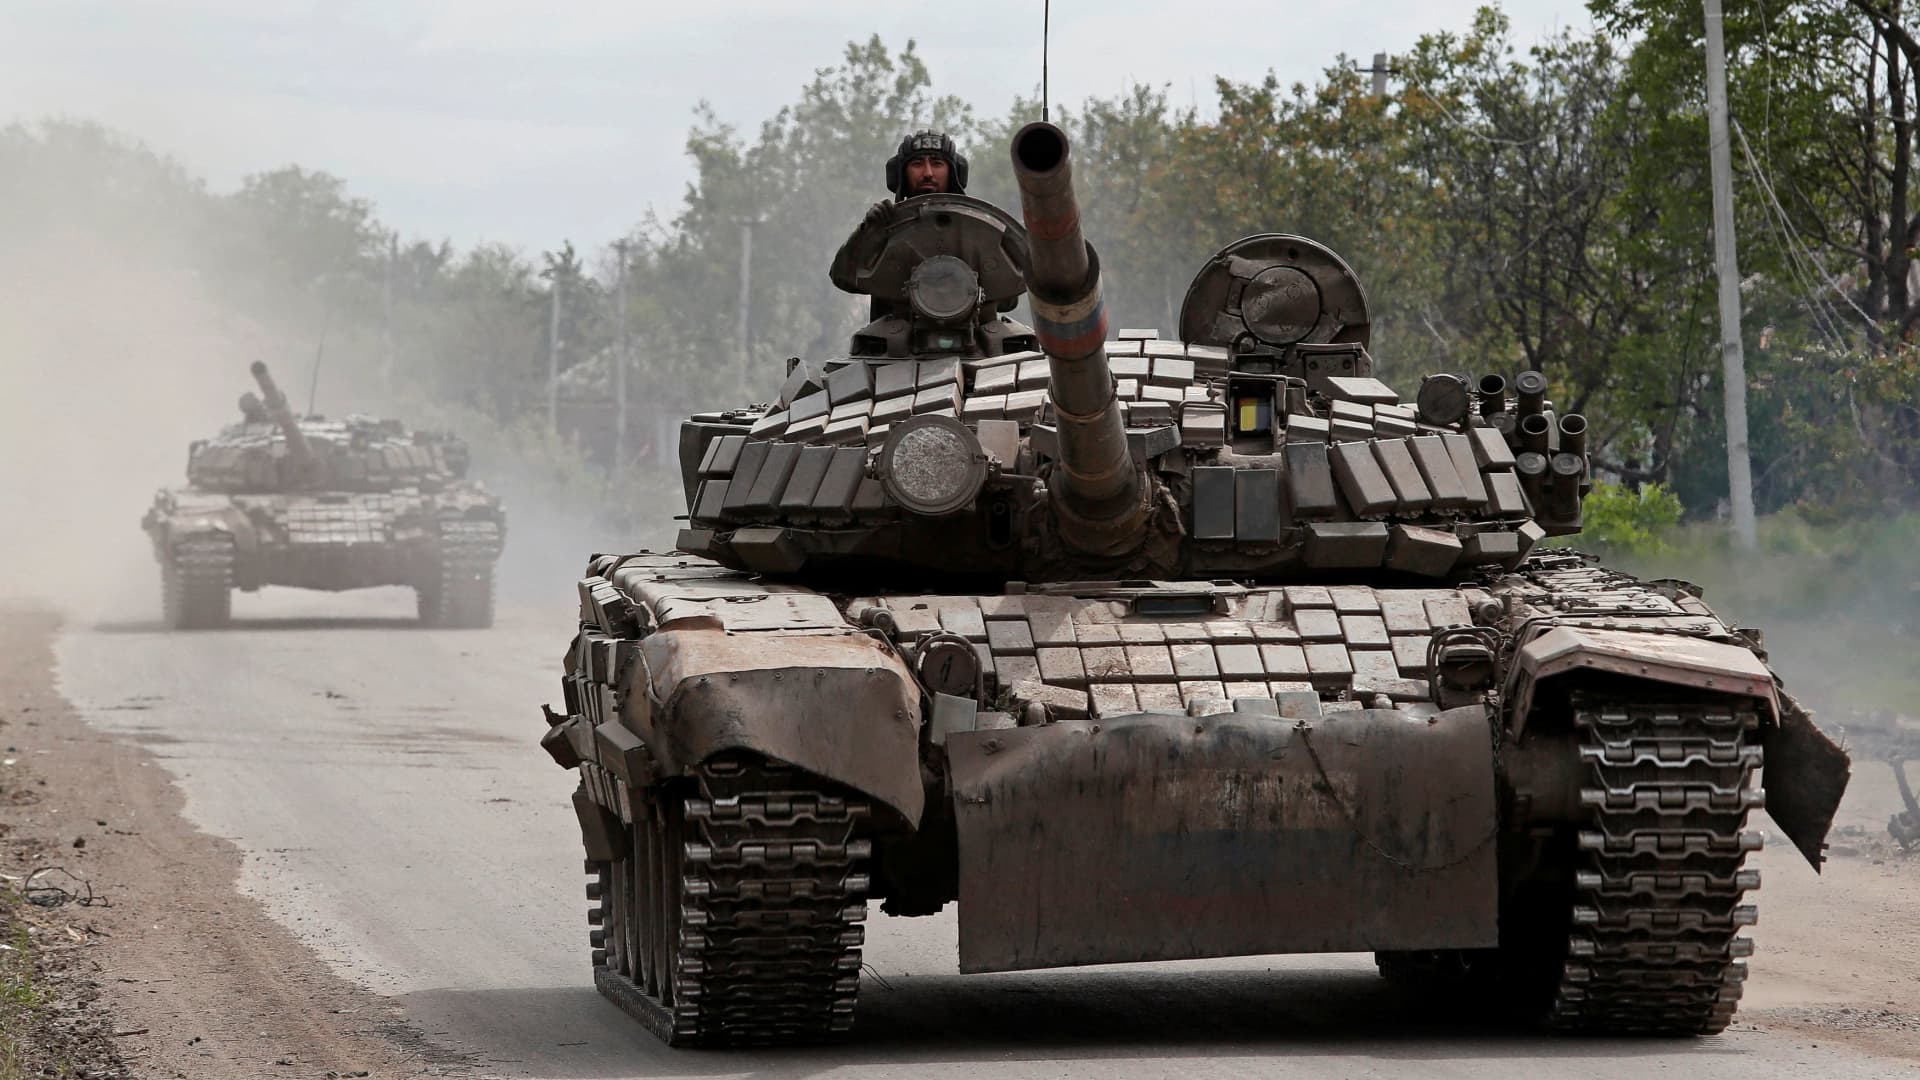 Tanks of pro-Russian troops drive along a street during Ukraine-Russia conflict in the town of Popasna in the Luhansk Region, Ukraine May 26, 2022.